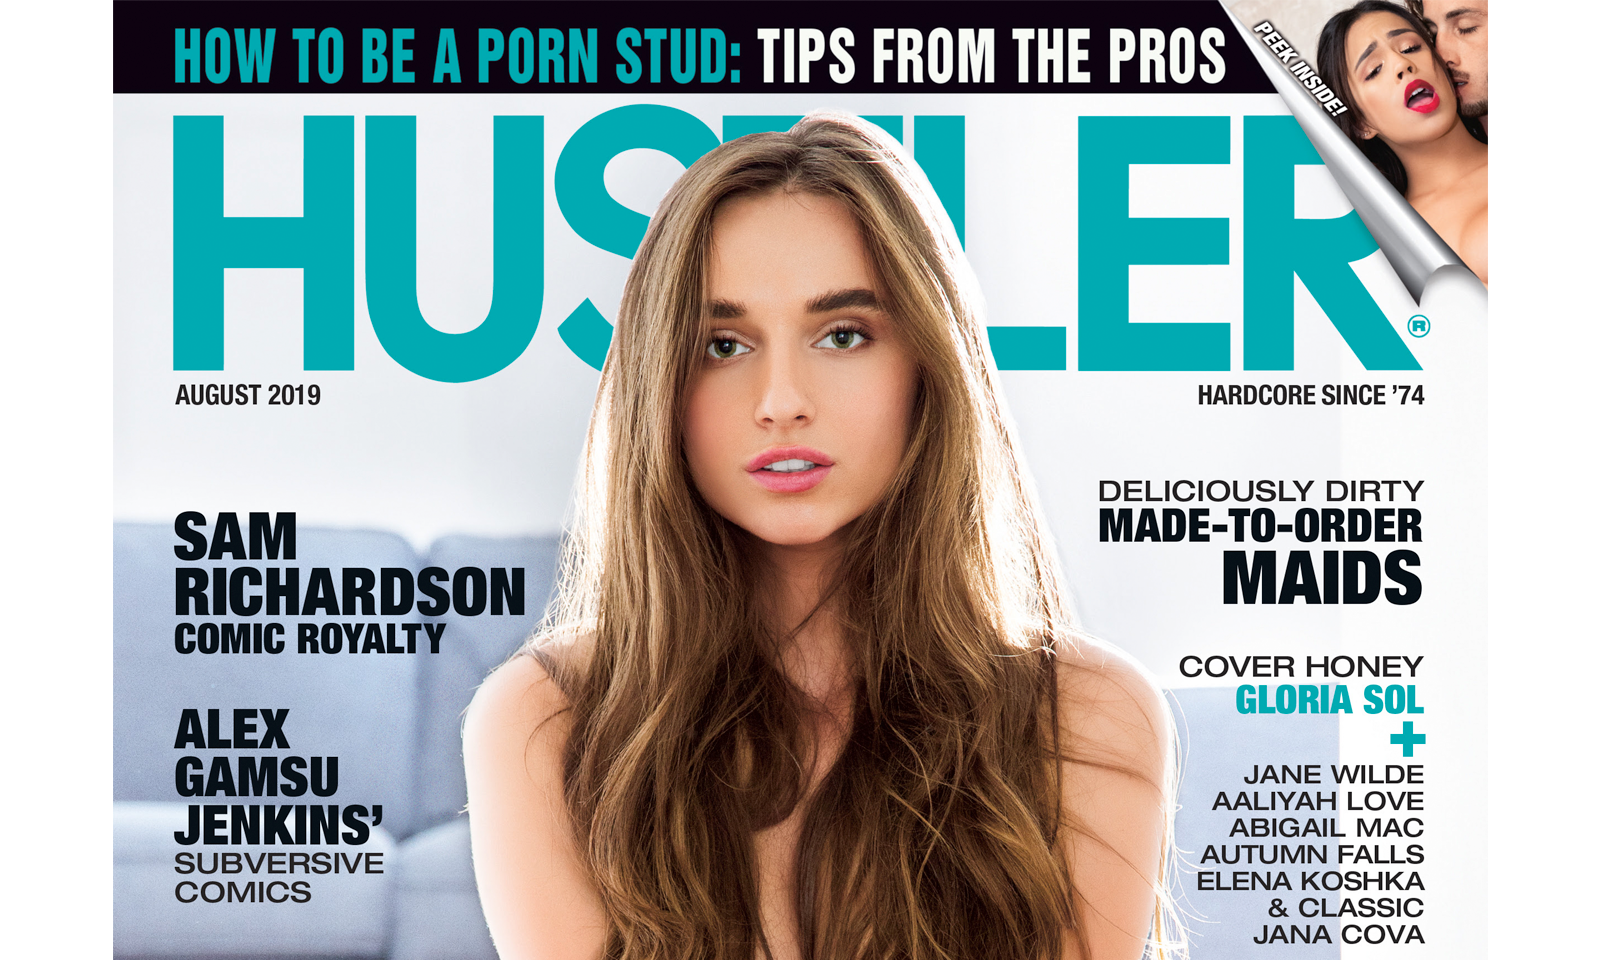 August 2019 Issue of Hustler Mag Hits Newsstands